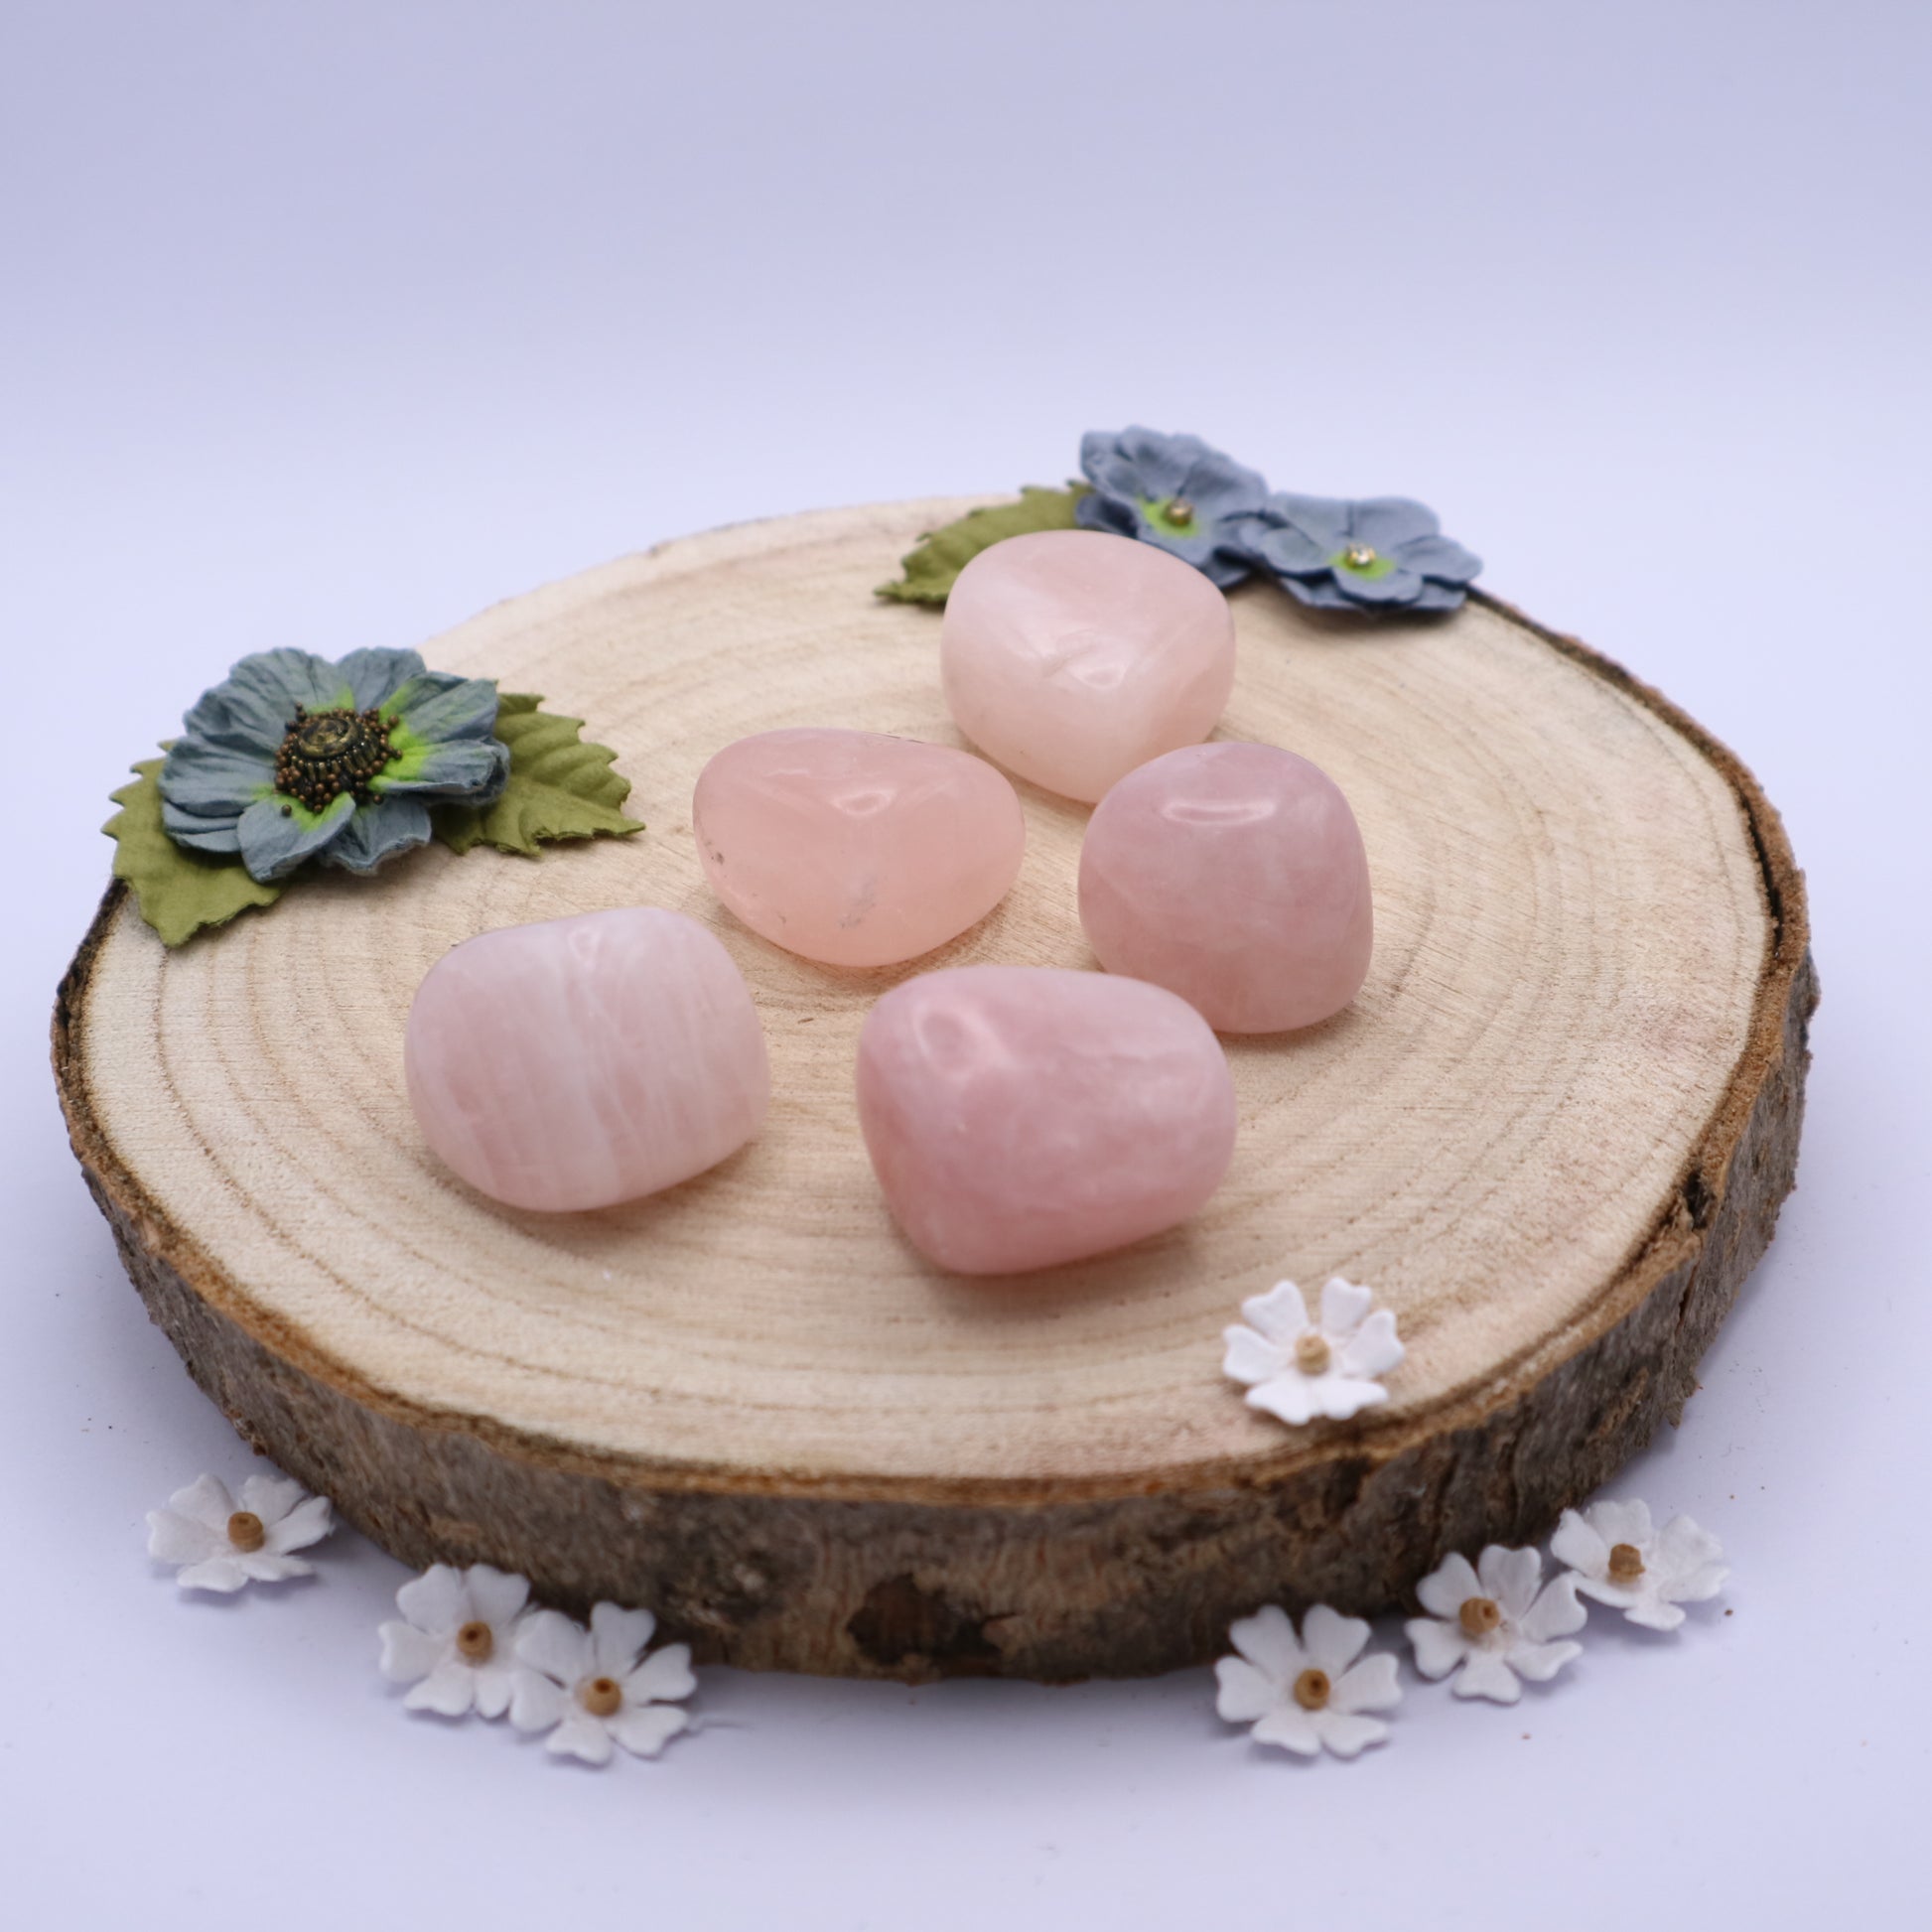 Five pieces of Rose Quartz crystals displayed on a piece of wood surrounded by flowers